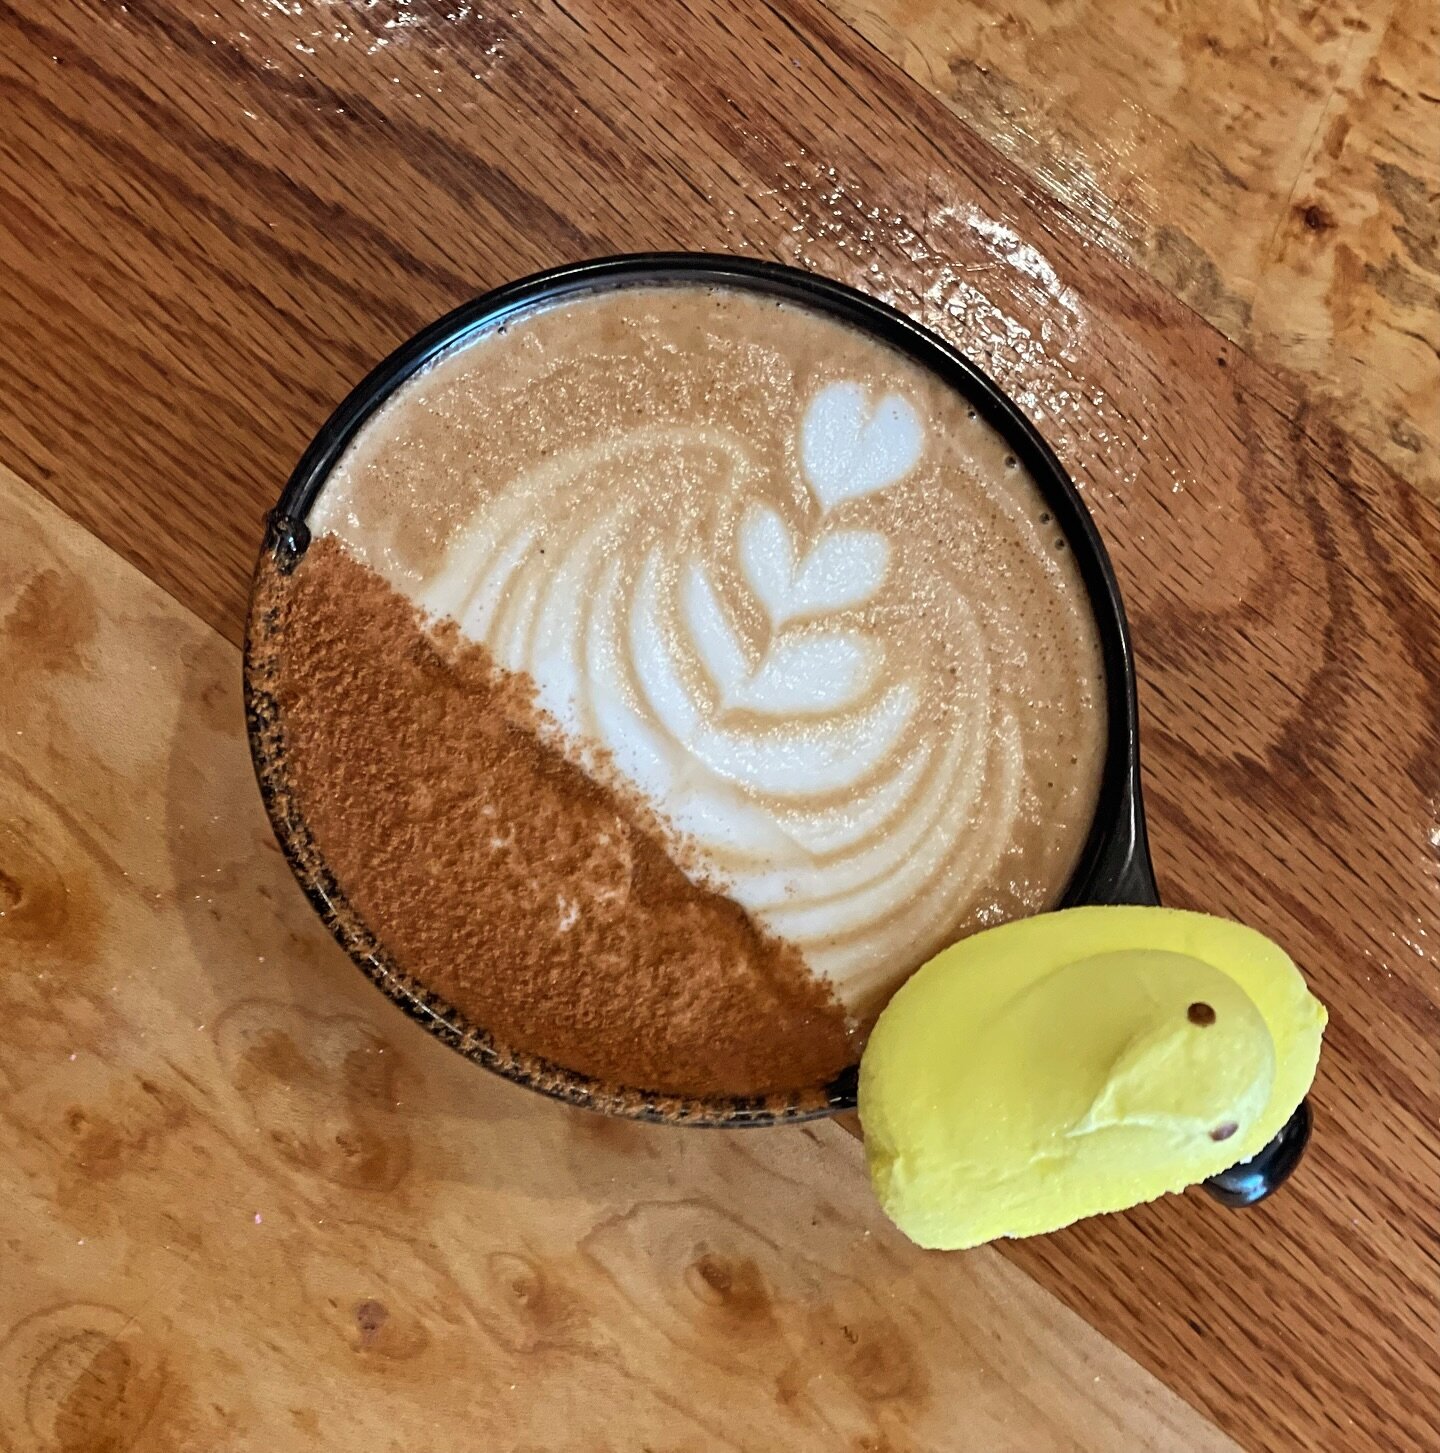 Happy Easter and wishing you a great holiday from all of us at North Perk! Special shoutout to our amazing Easter Crew&hellip;. Greta, Autumn, Eve, Sarah &amp; Sophia 
🐰💛🐰

@northperkcoffee #northperkcoffee #coffeeshop #petoskeymichigan #community